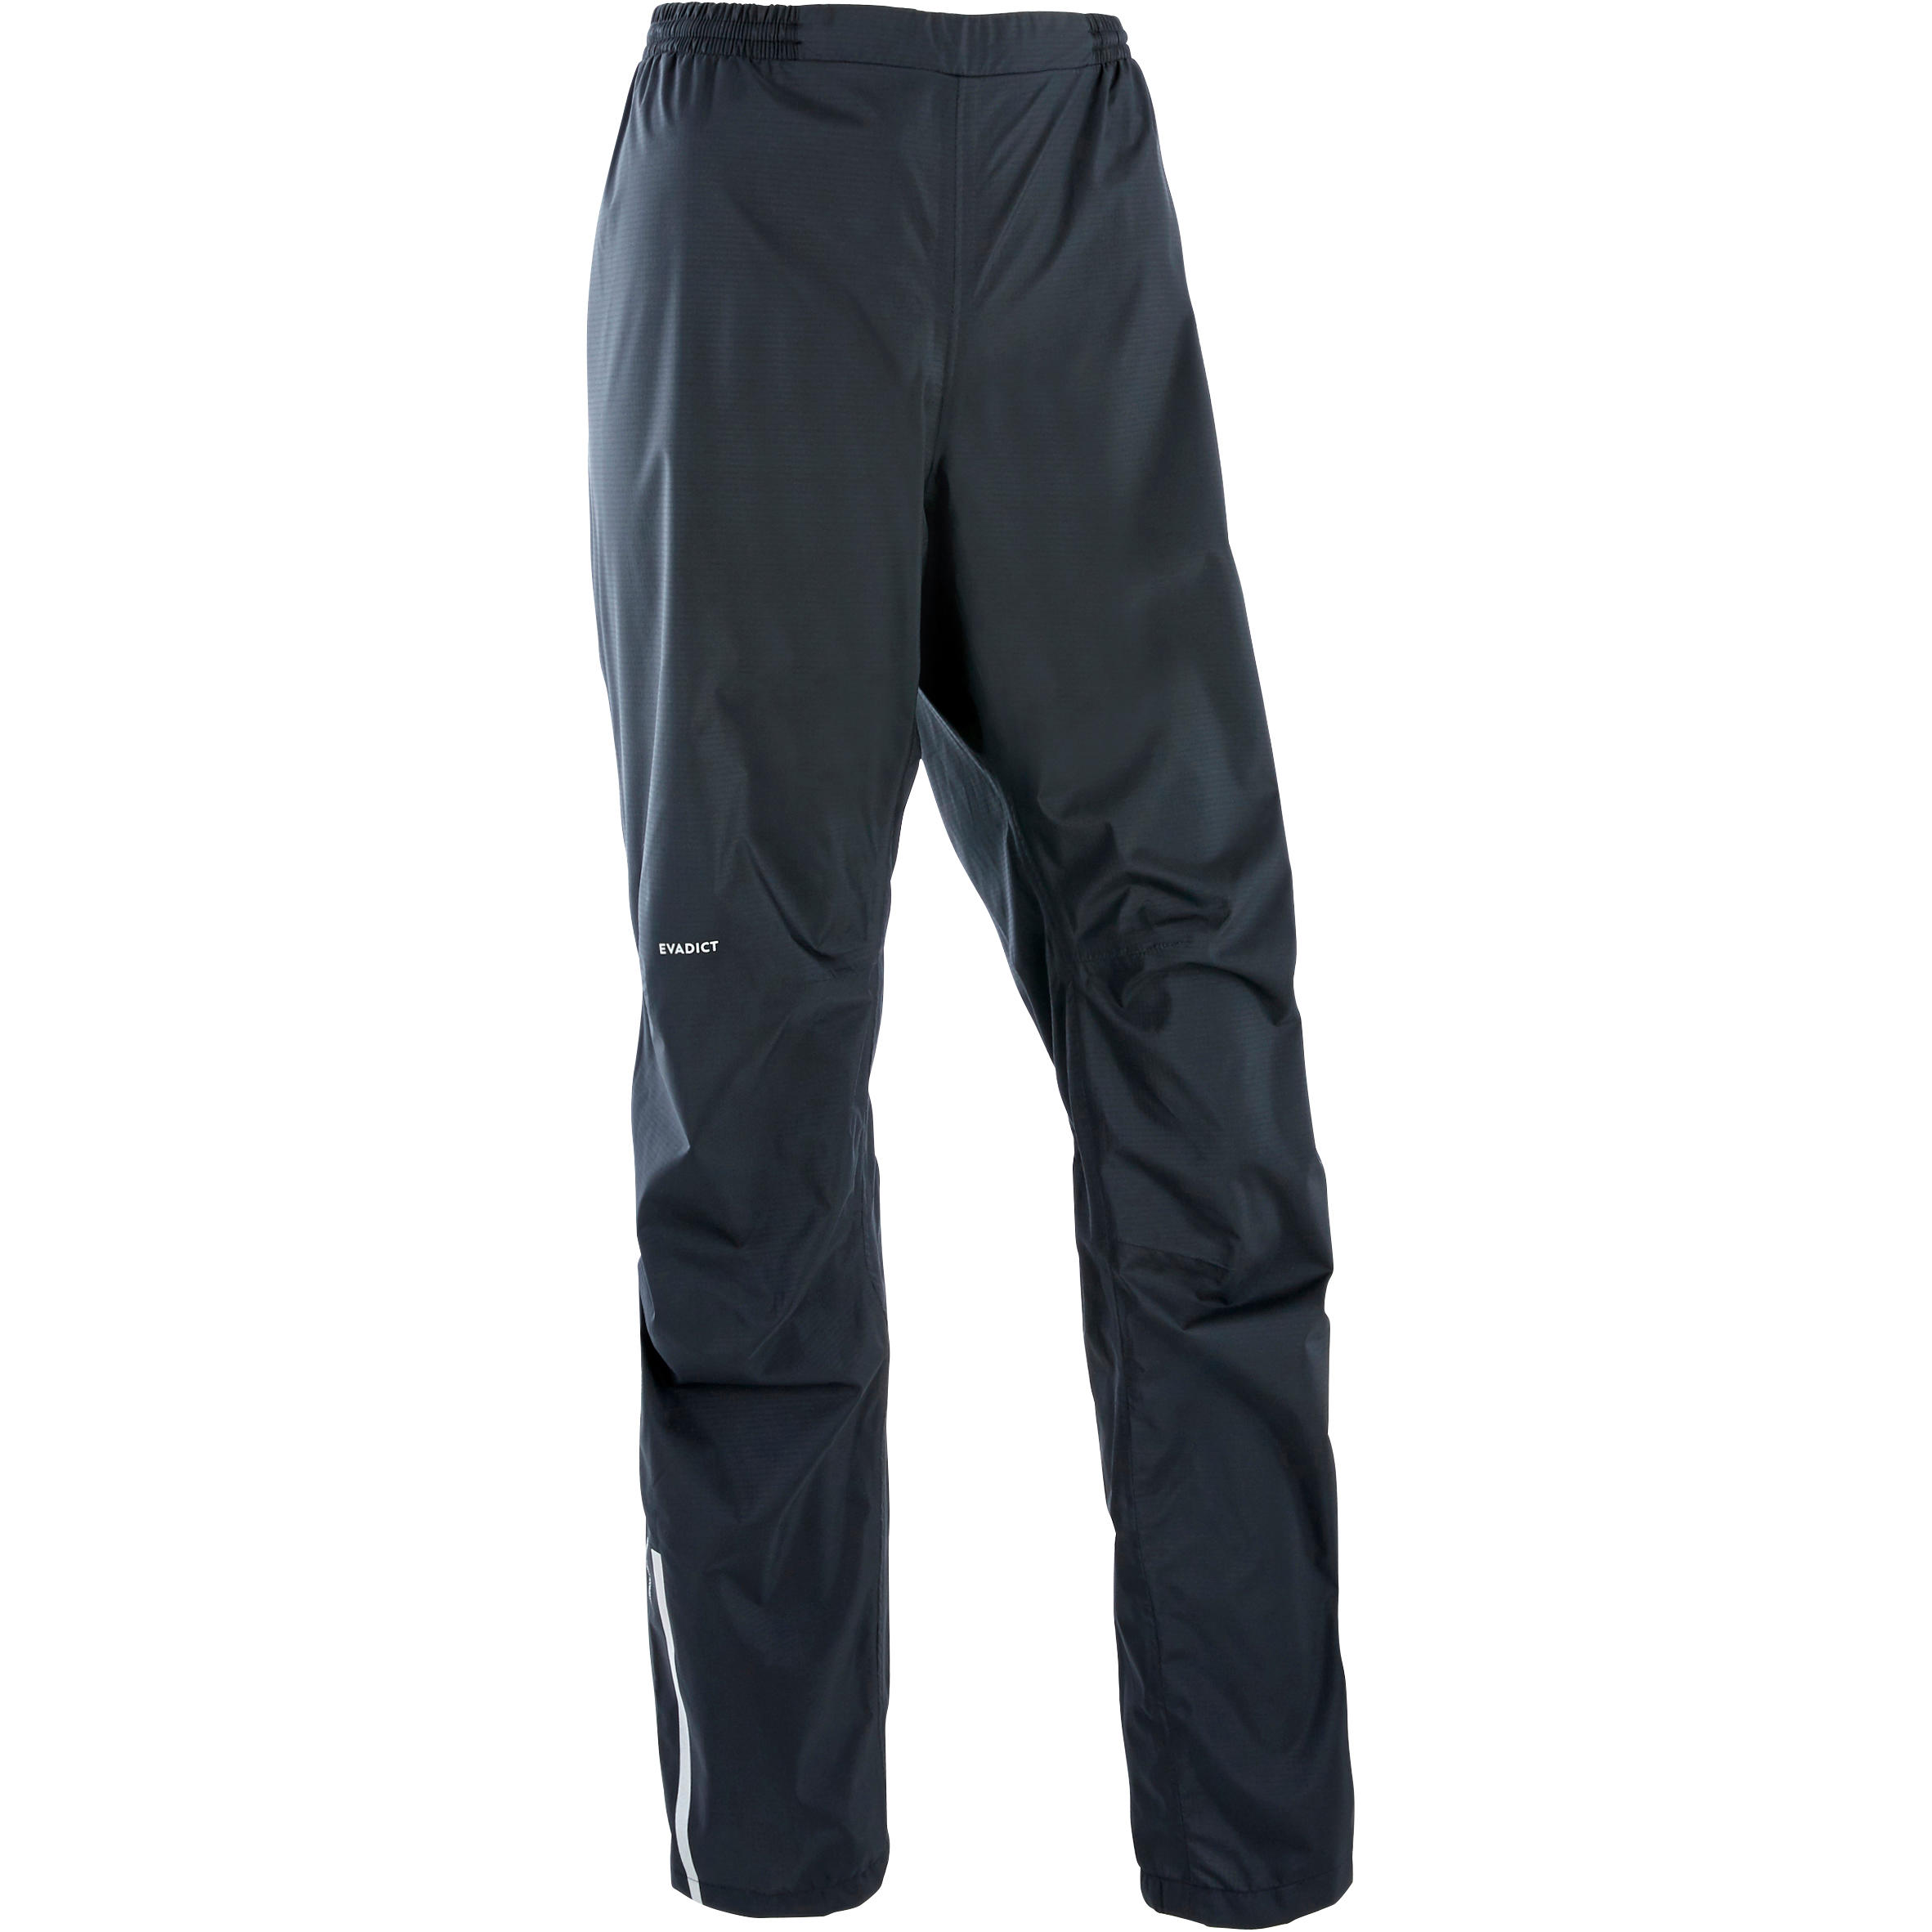 Share more than 87 decathlon hiking trousers best - in.cdgdbentre